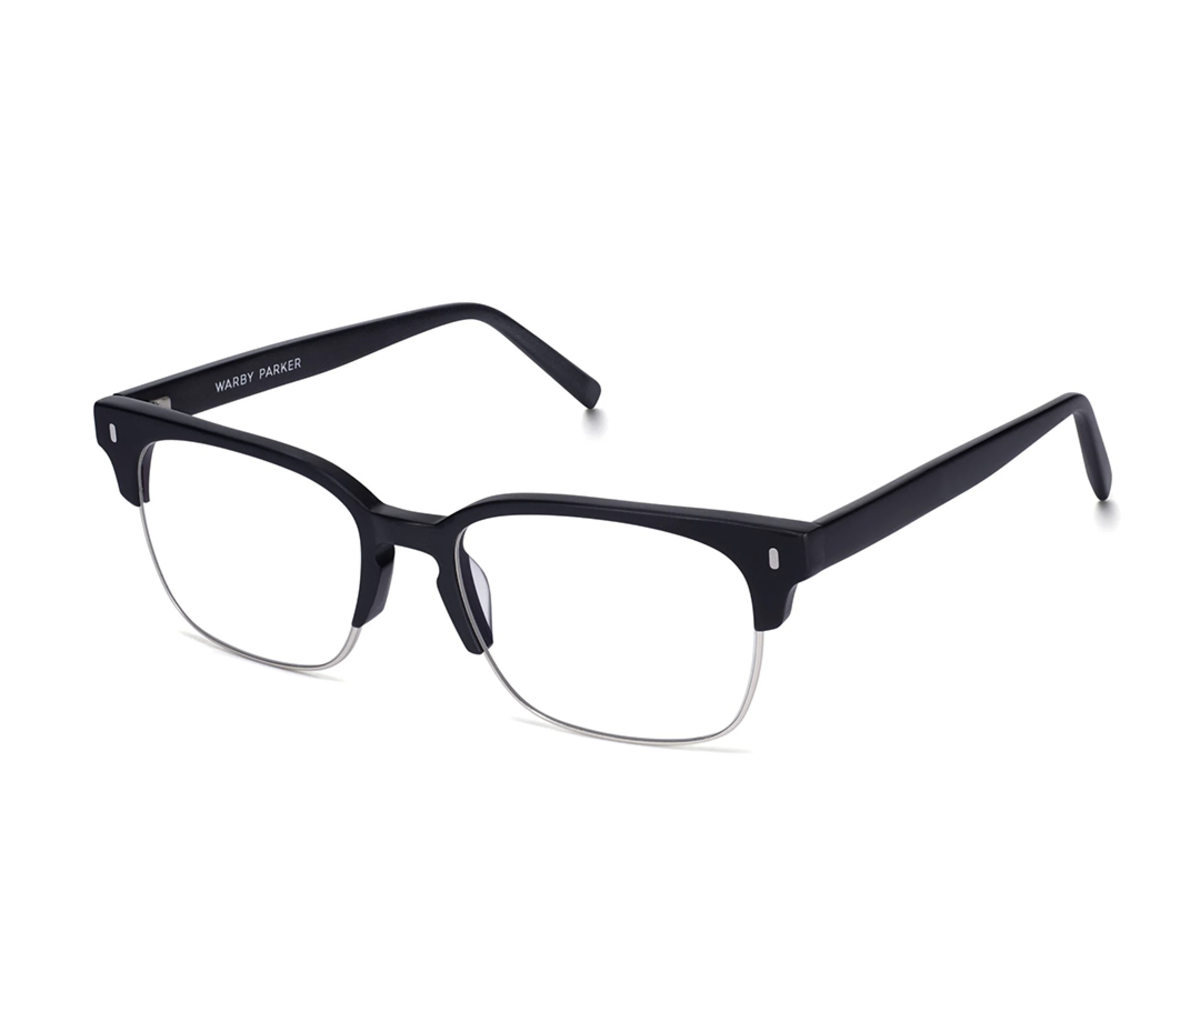 Get Back to The Office in Style With Glasses From Warby Parker - Men's ...